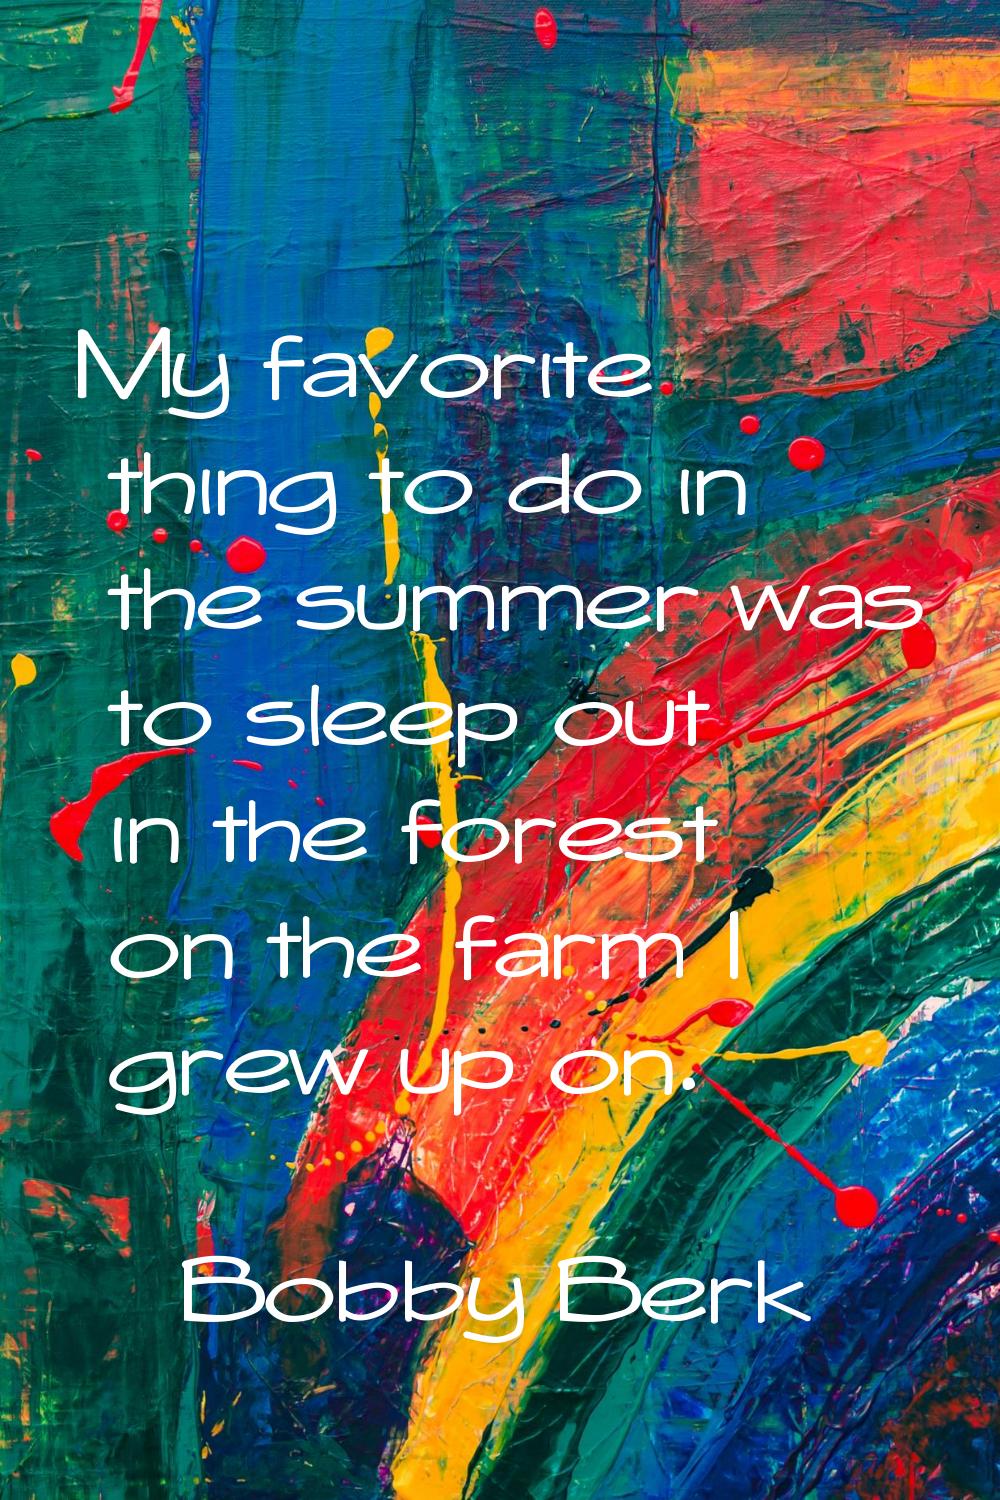 My favorite thing to do in the summer was to sleep out in the forest on the farm I grew up on.